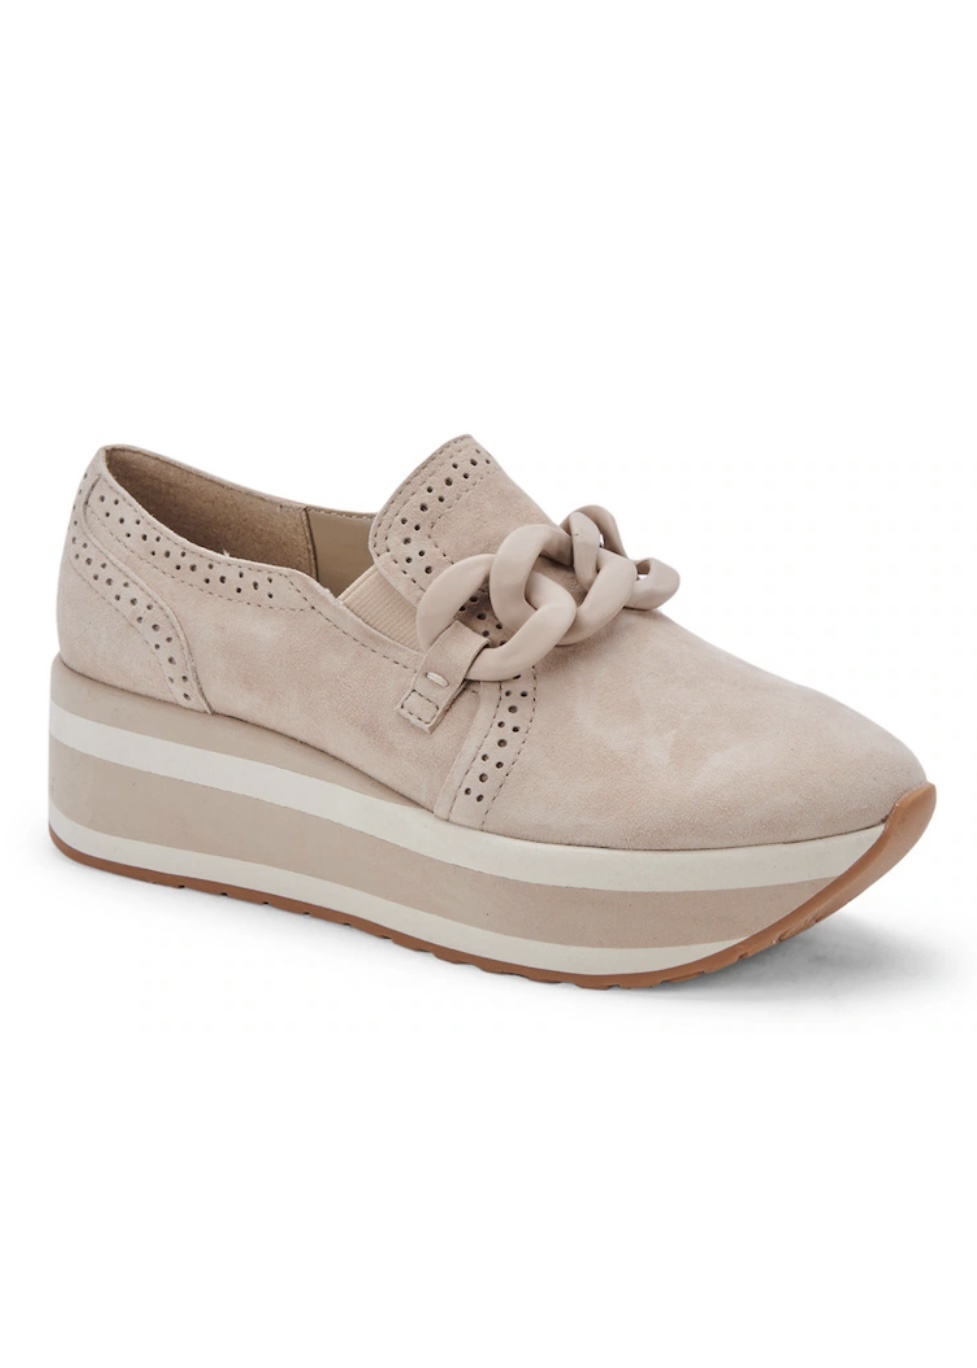 Dolce Vita Jhenee Dune Suede Sneaker - Heart of the South